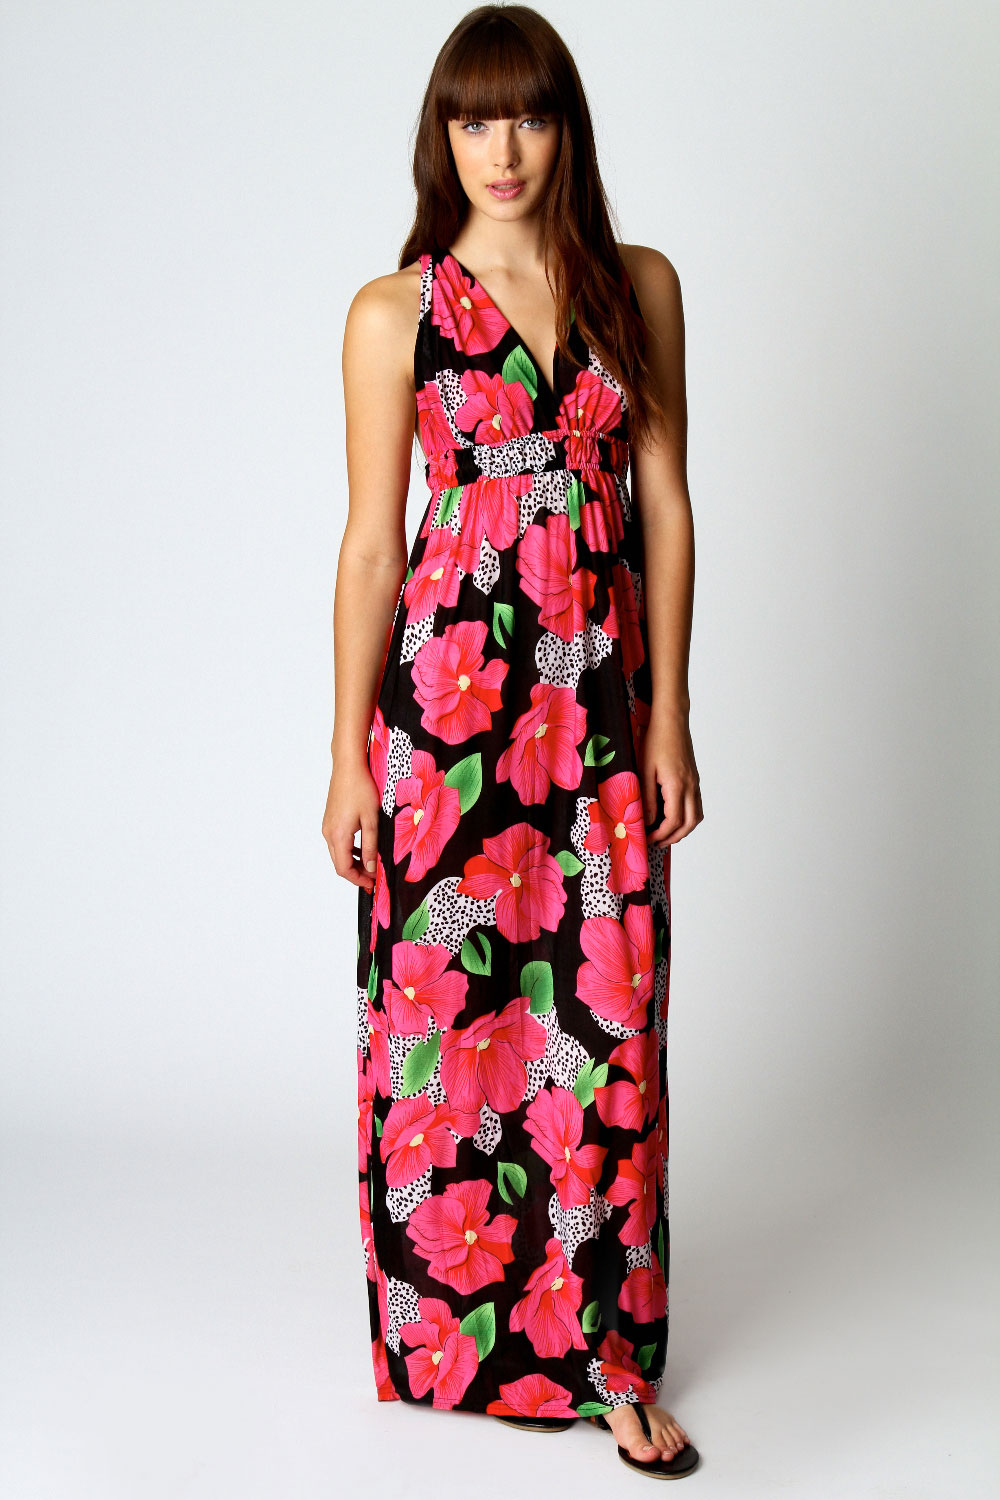 Download this Cheap Maxi Dresses Online picture